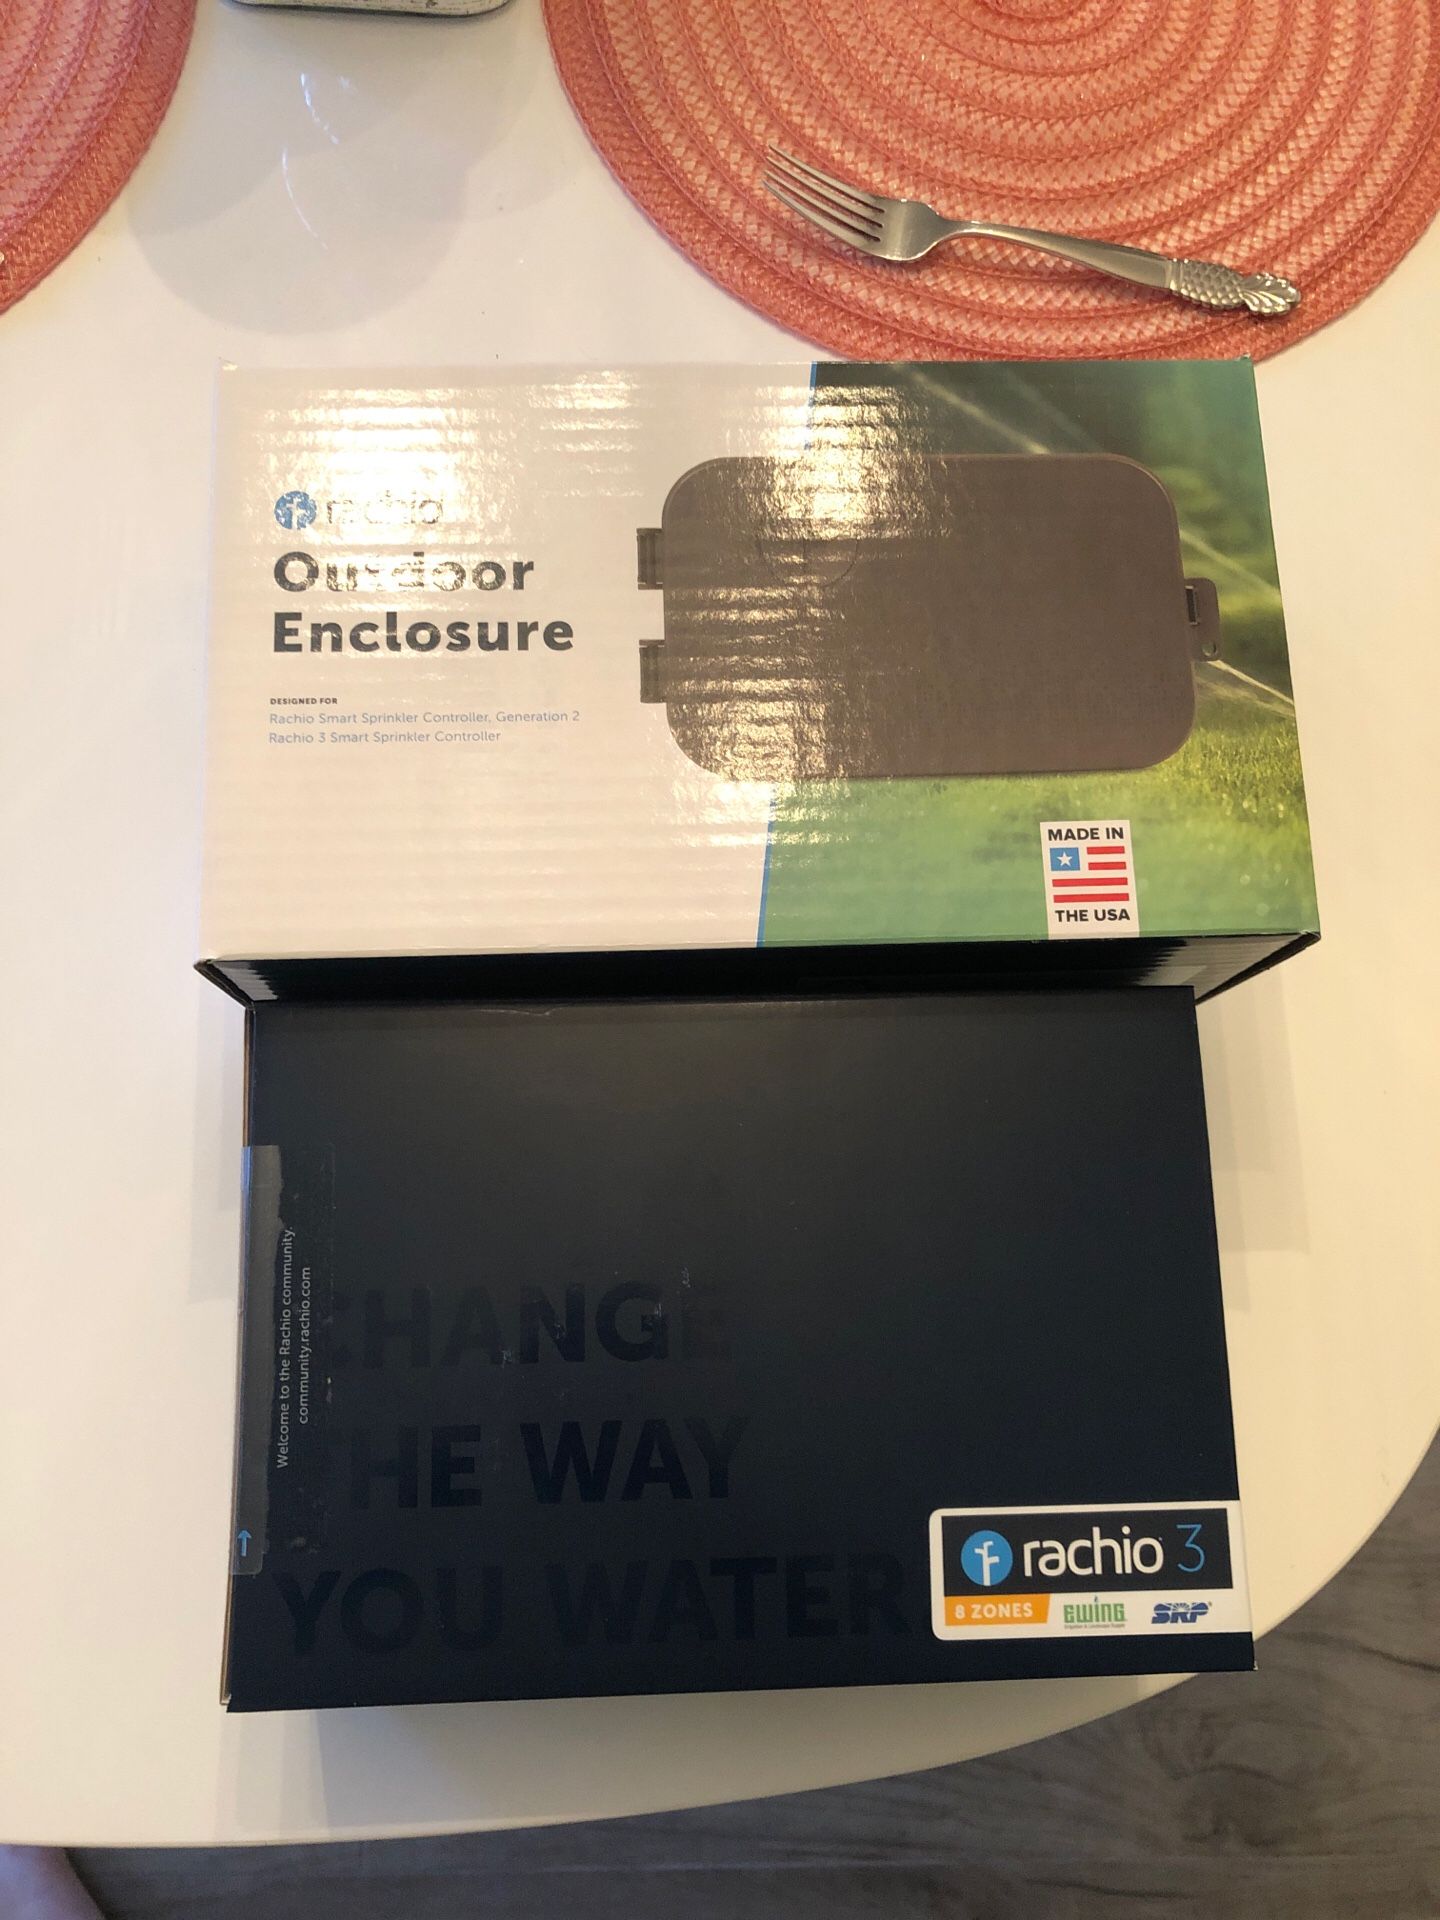 Rachio 3 smart sprinkler system and outdoor enclosure